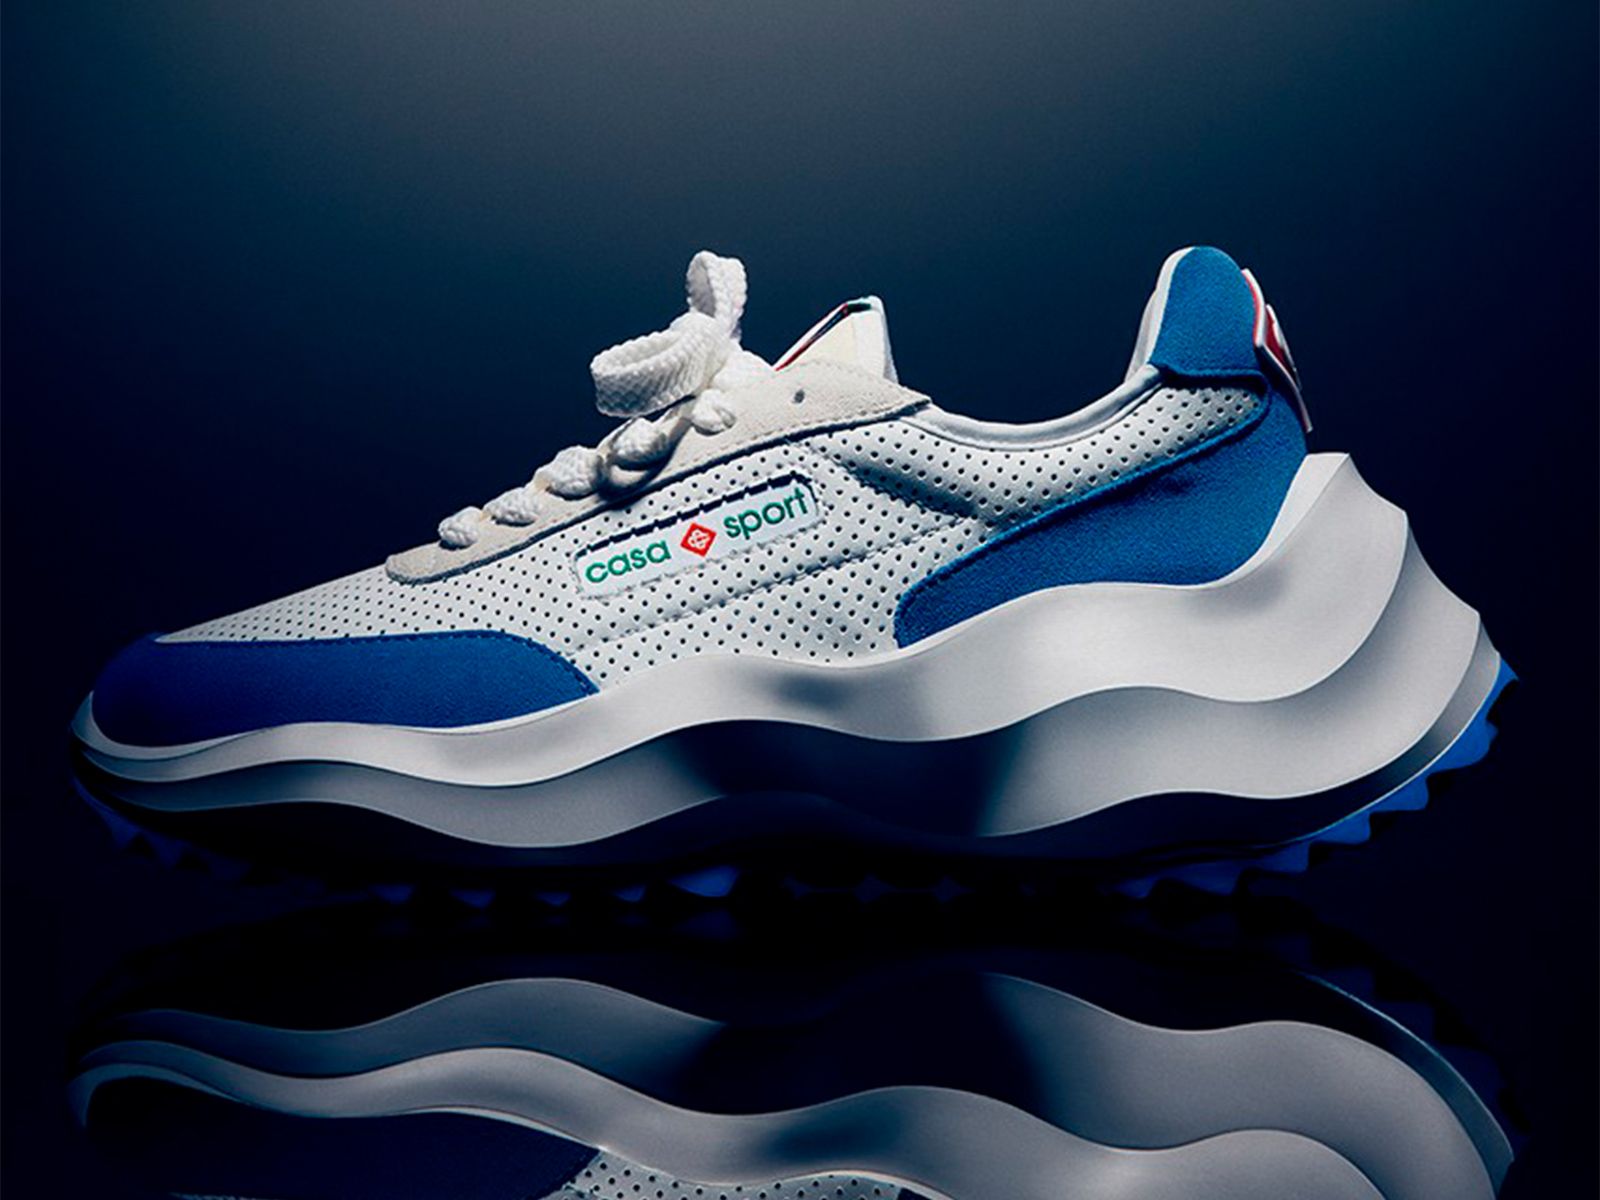 Casablanca’s first sneaker is called Atlantis and is inspired by the movement of water